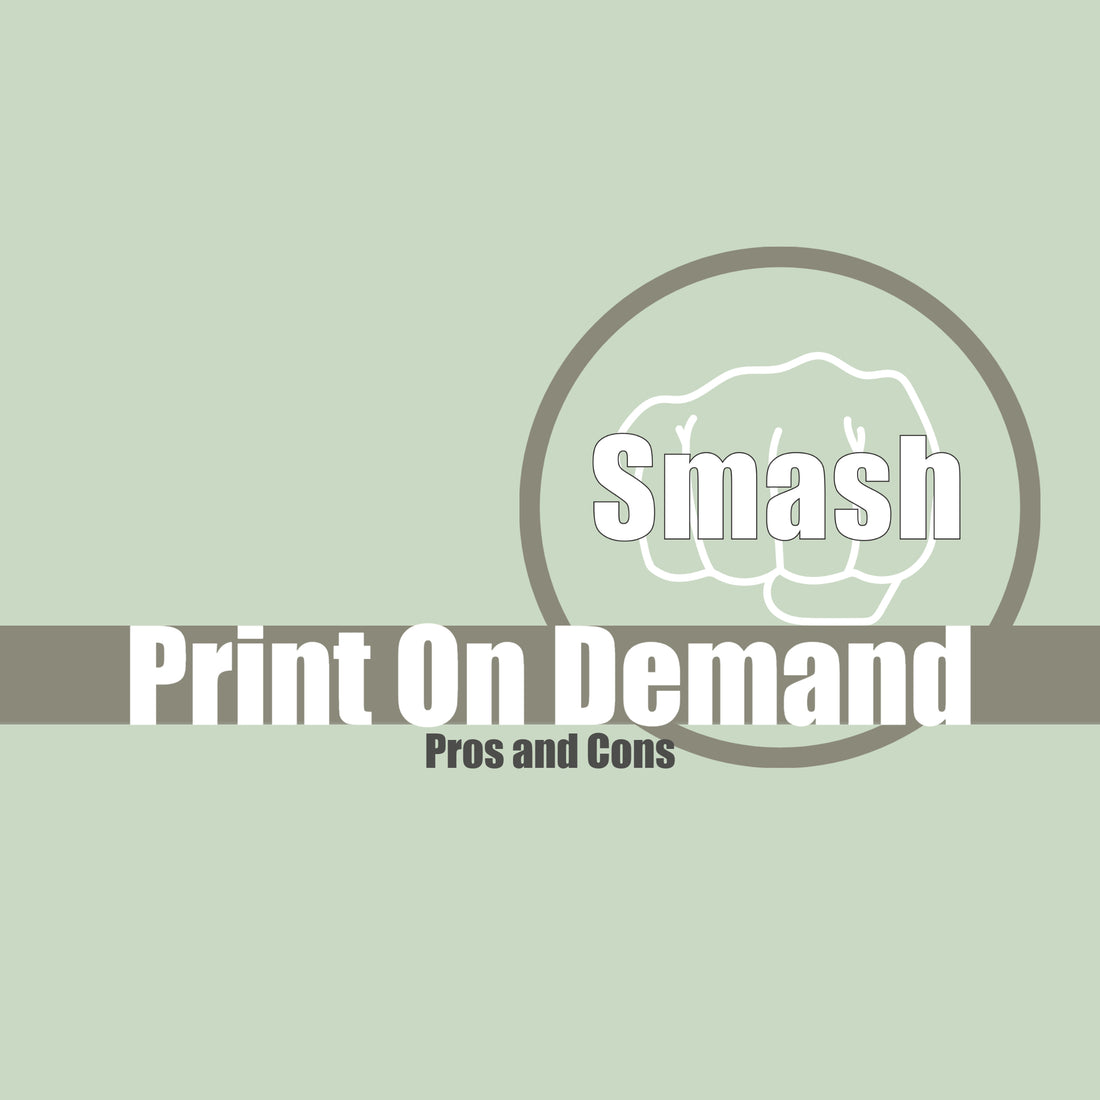 Print on Demand Pros and Cons